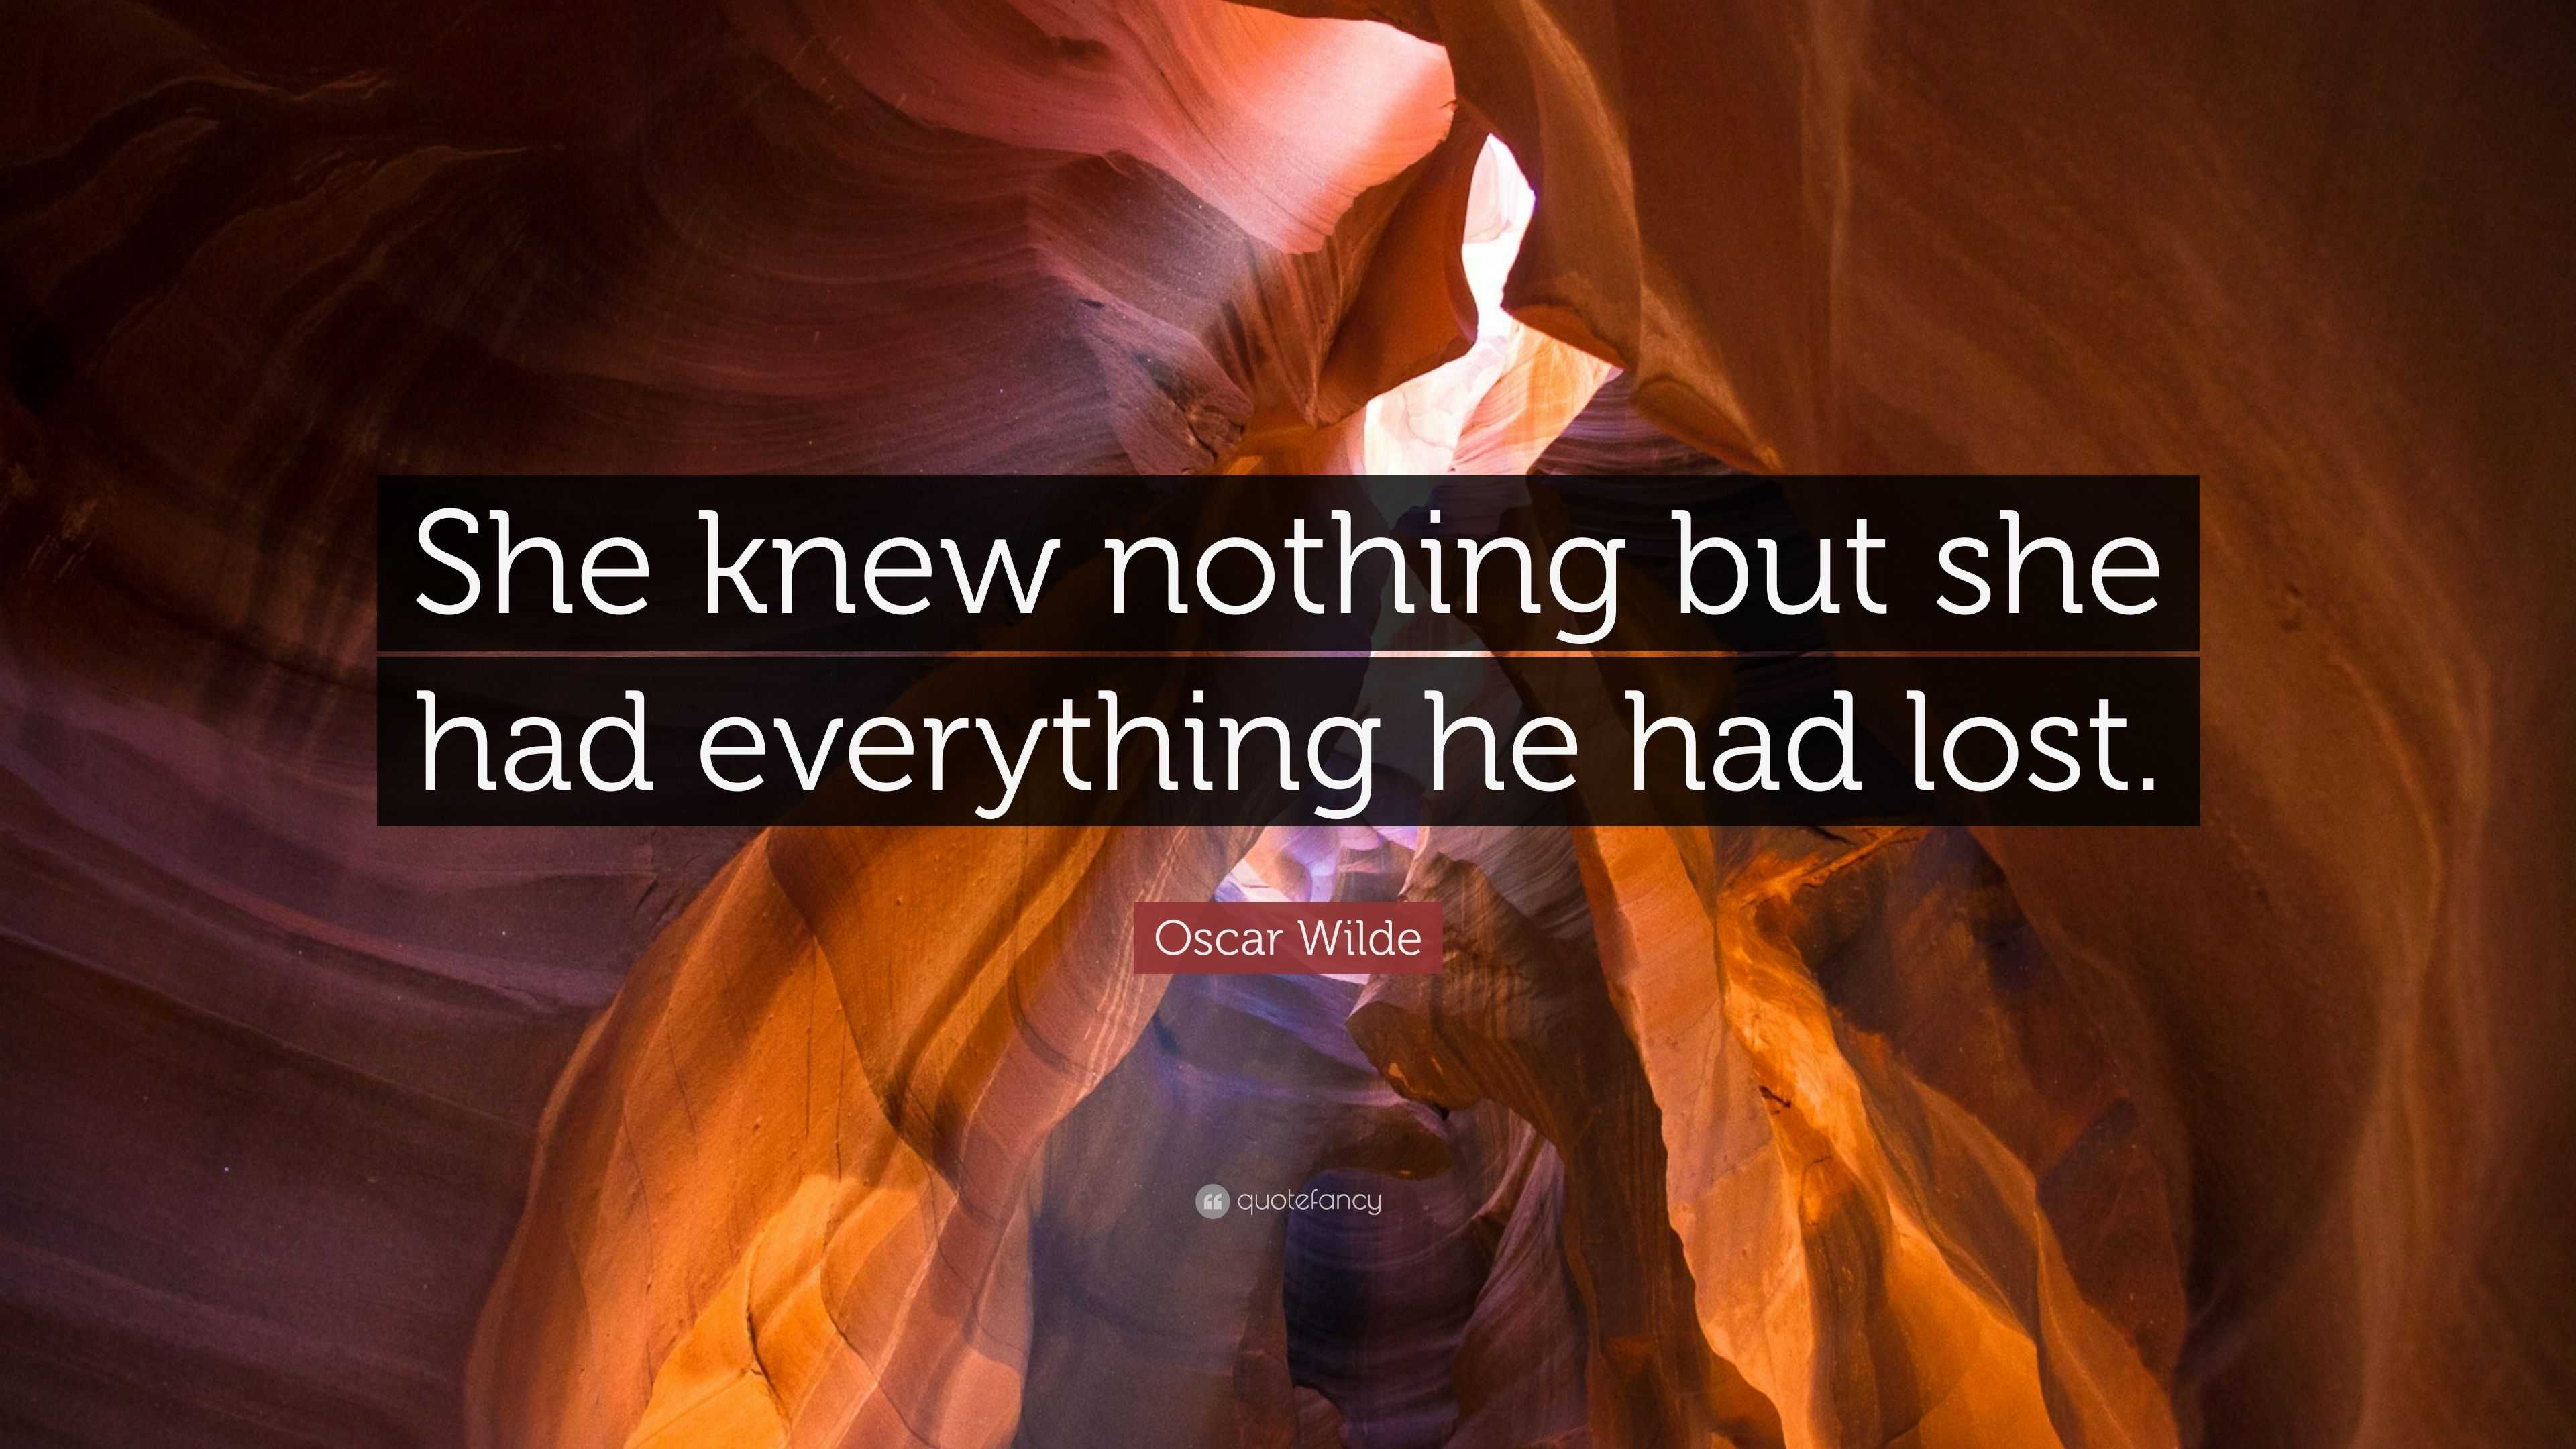 Oscar Wilde Quote: "She knew nothing but she had everything he had lost." (7 wallpapers ...